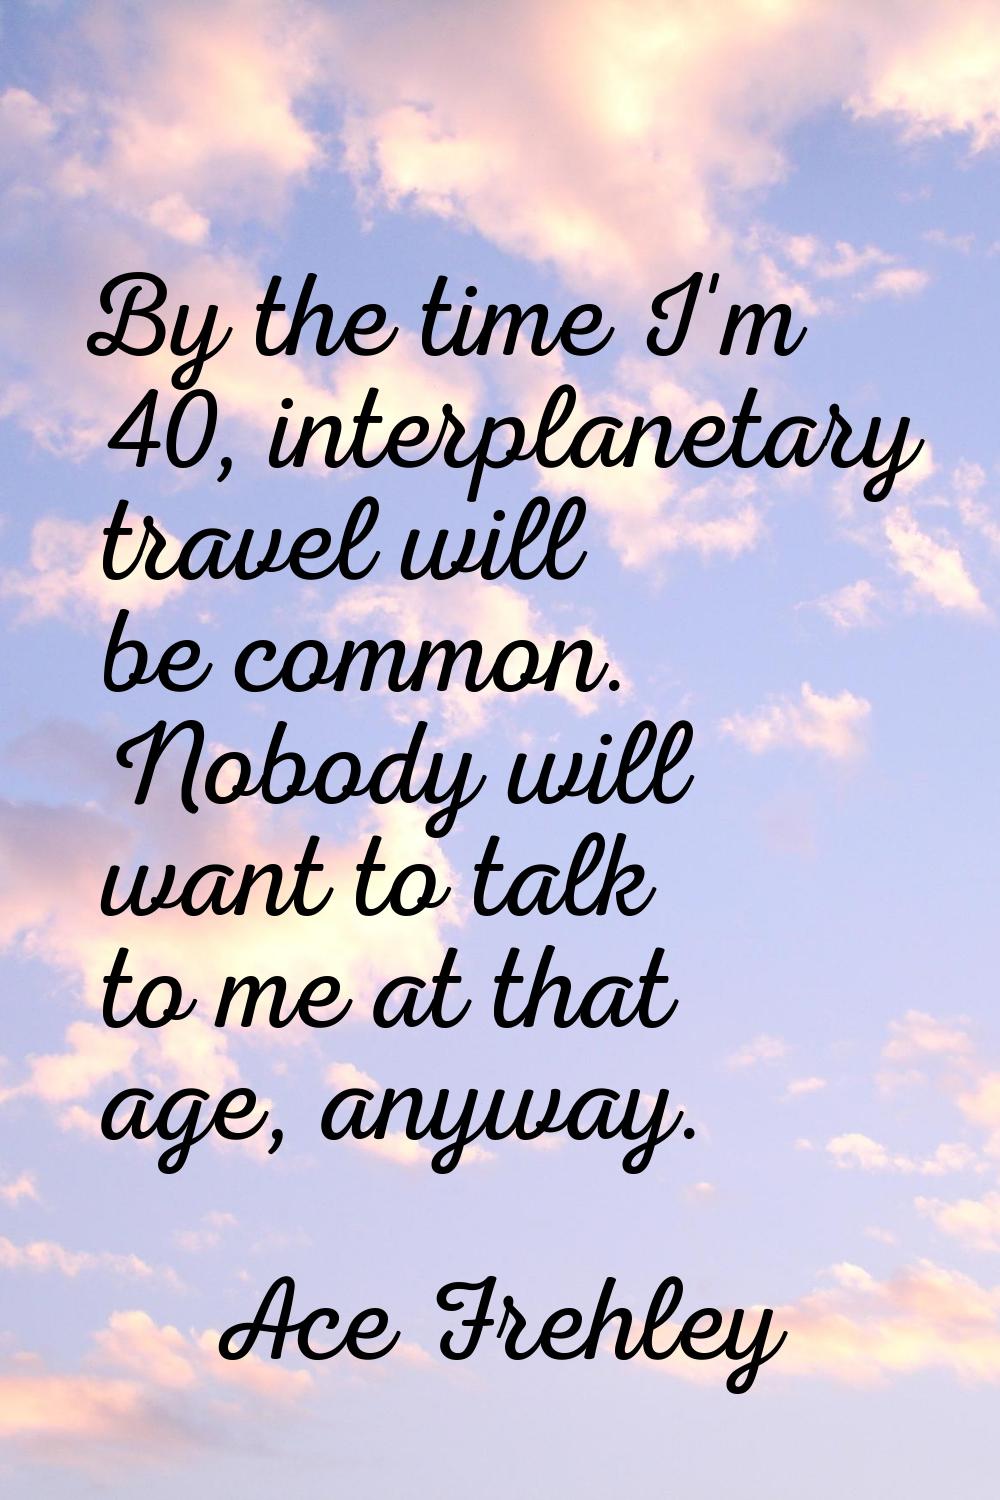 By the time I'm 40, interplanetary travel will be common. Nobody will want to talk to me at that ag